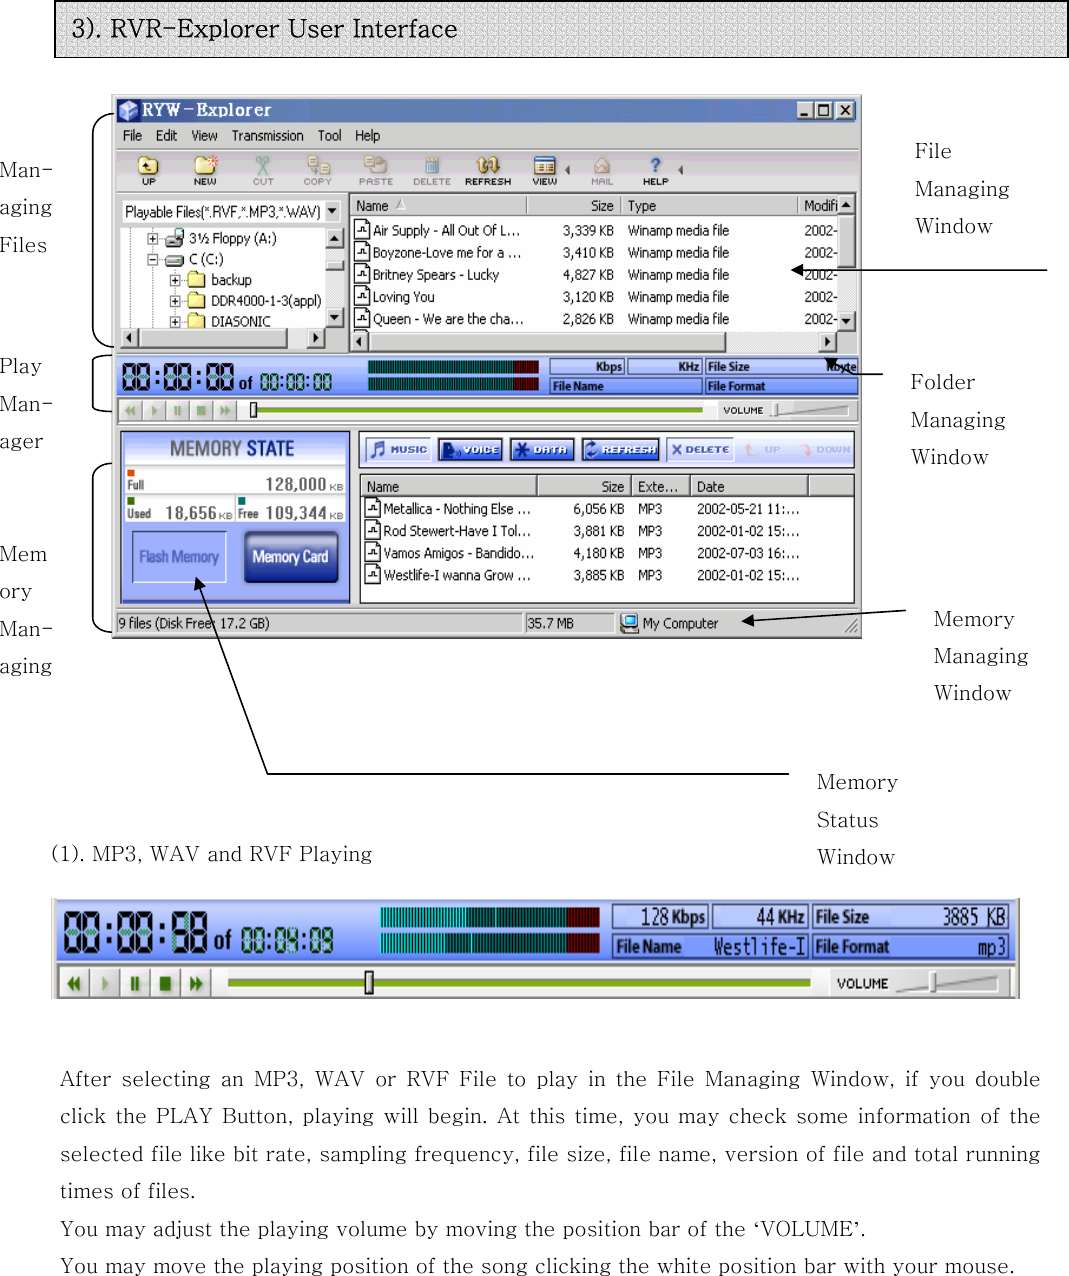                 Man- aging Files    Play Man- ager   Mem ory Man- aging                                                                                                                                                                                                                             (1). MP3, WAV and RVF Playing           After  selecting  an  MP3,  WAV  or  RVF  File  to  play  in  the  File  Managing  Window,  if  you  double click the  PLAY  Button, playing will begin.  At  this  time,  you may  check some  information  of  the selected file like bit rate, sampling frequency, file size, file name, version of file and total running times of files. You may adjust the playing volume by moving the position bar of the ‘VOLUME’.   You may move the playing position of the song clicking the white position bar with your mouse.          File Managing Window Folder Managing Window Memory Status Window Memory Managing Window 3). RVR-Explorer User Interface 